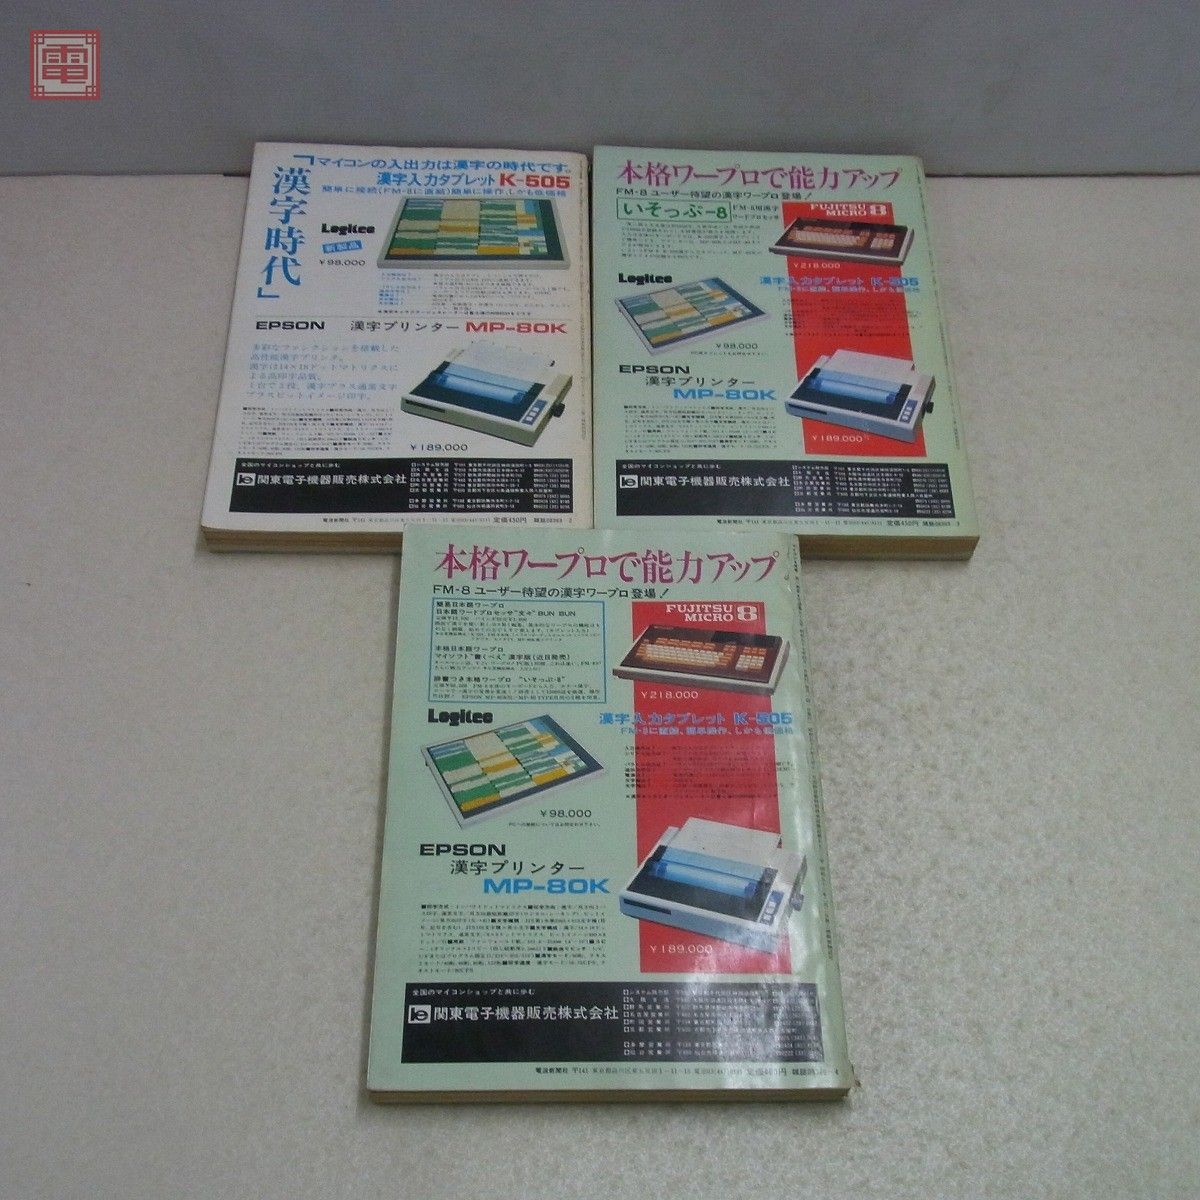  magazine monthly microcomputer 1982 year 9 pcs. set don't fit radio wave newspaper company [20